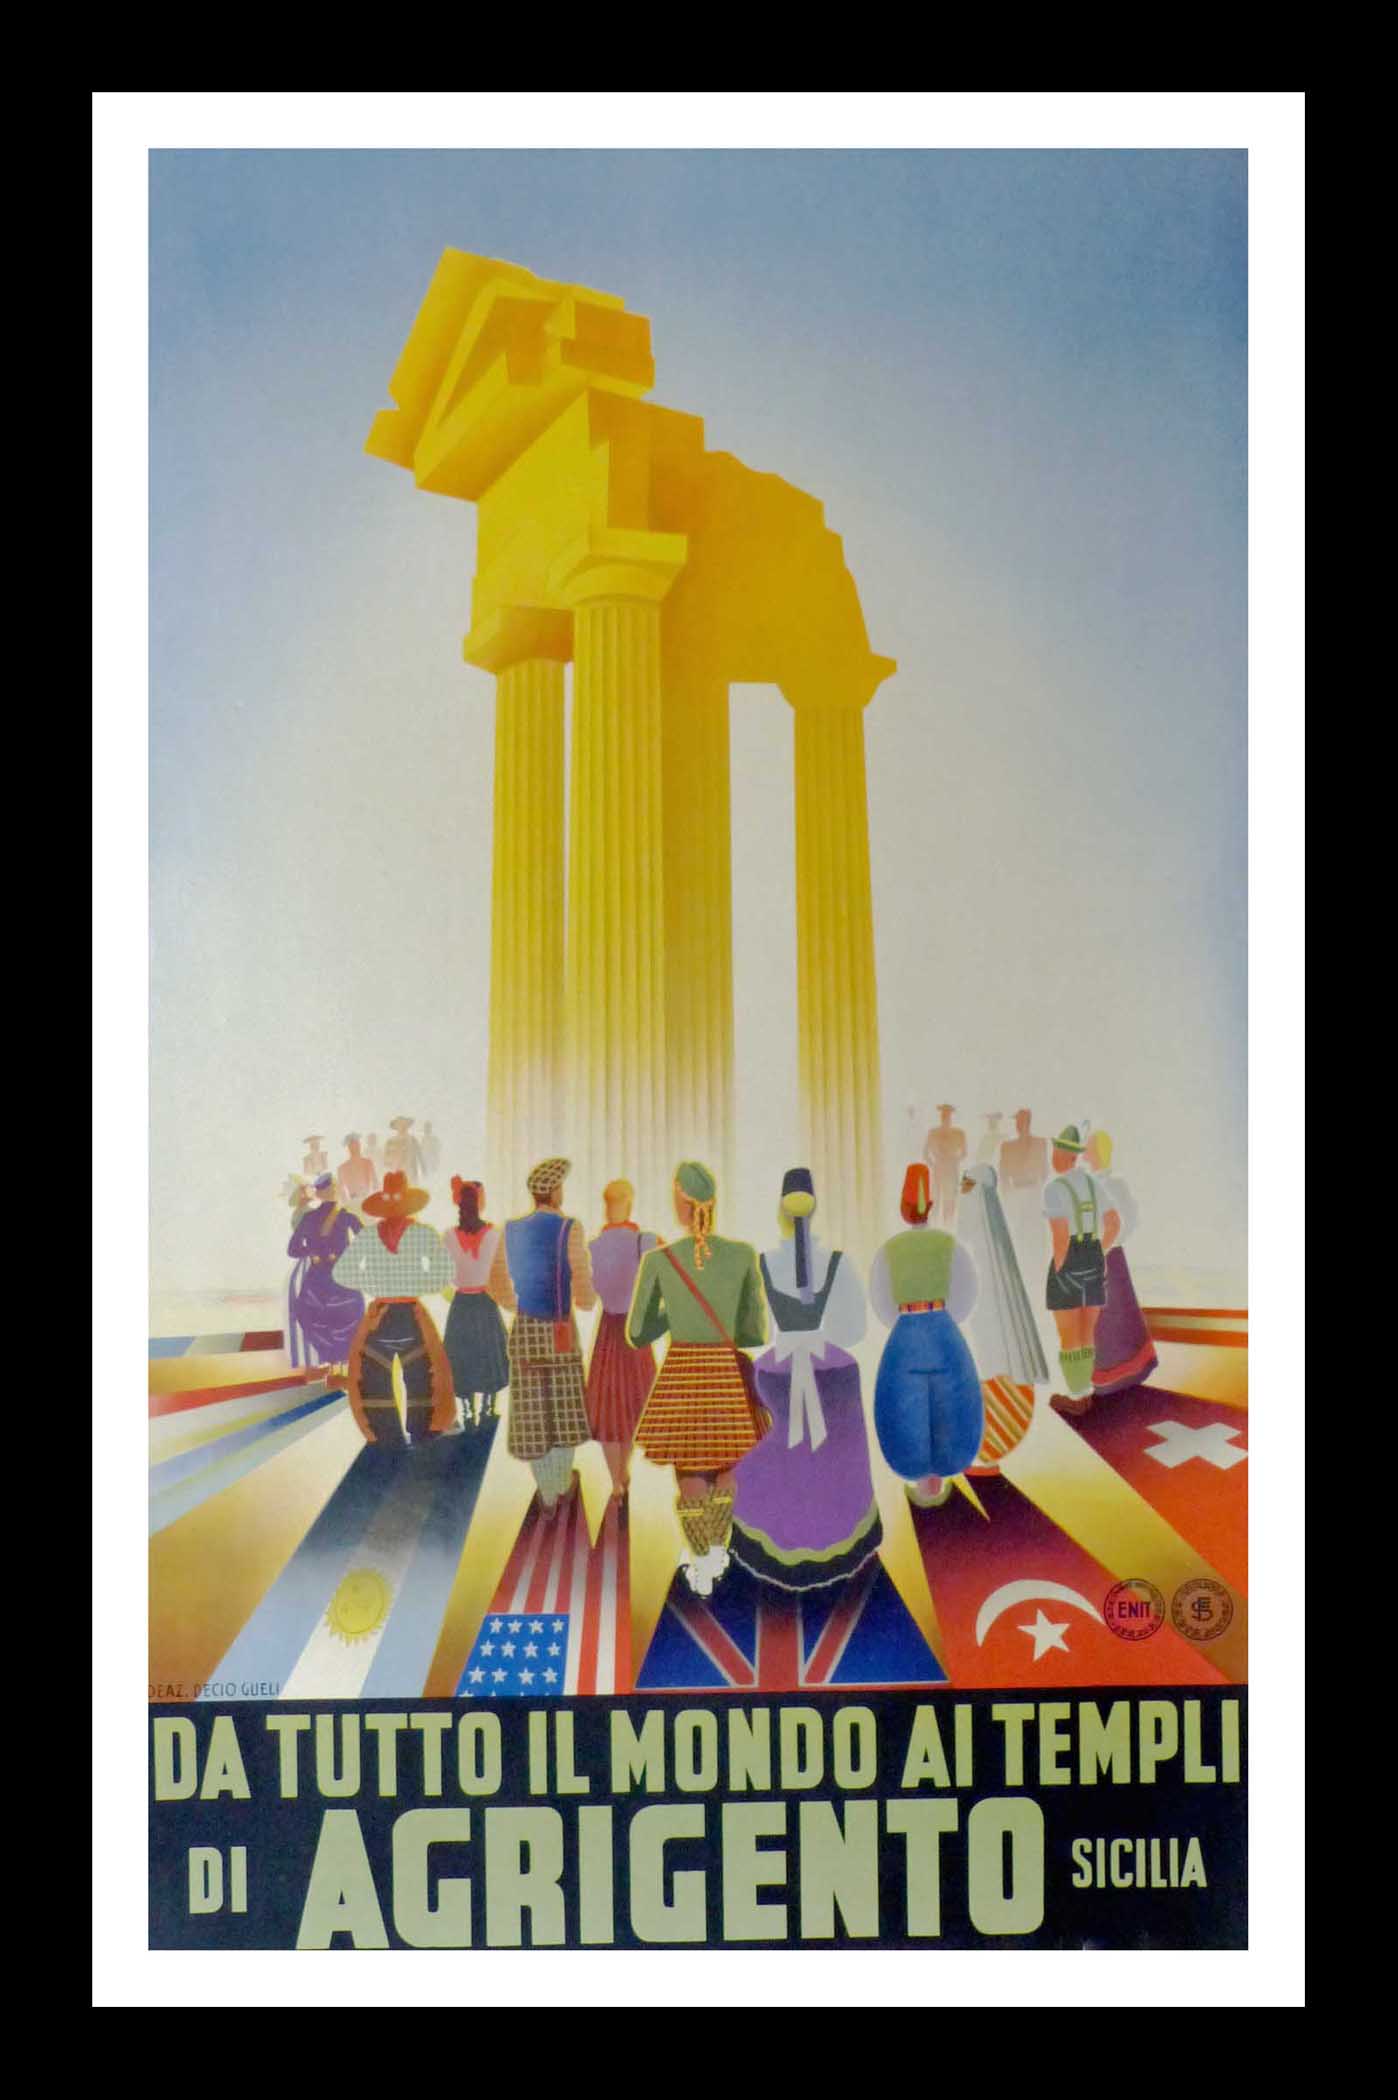 (alt="original tourism poster From All The World At the Temples Of Agrigento Di Sicilia Italy Sicilian 1951")